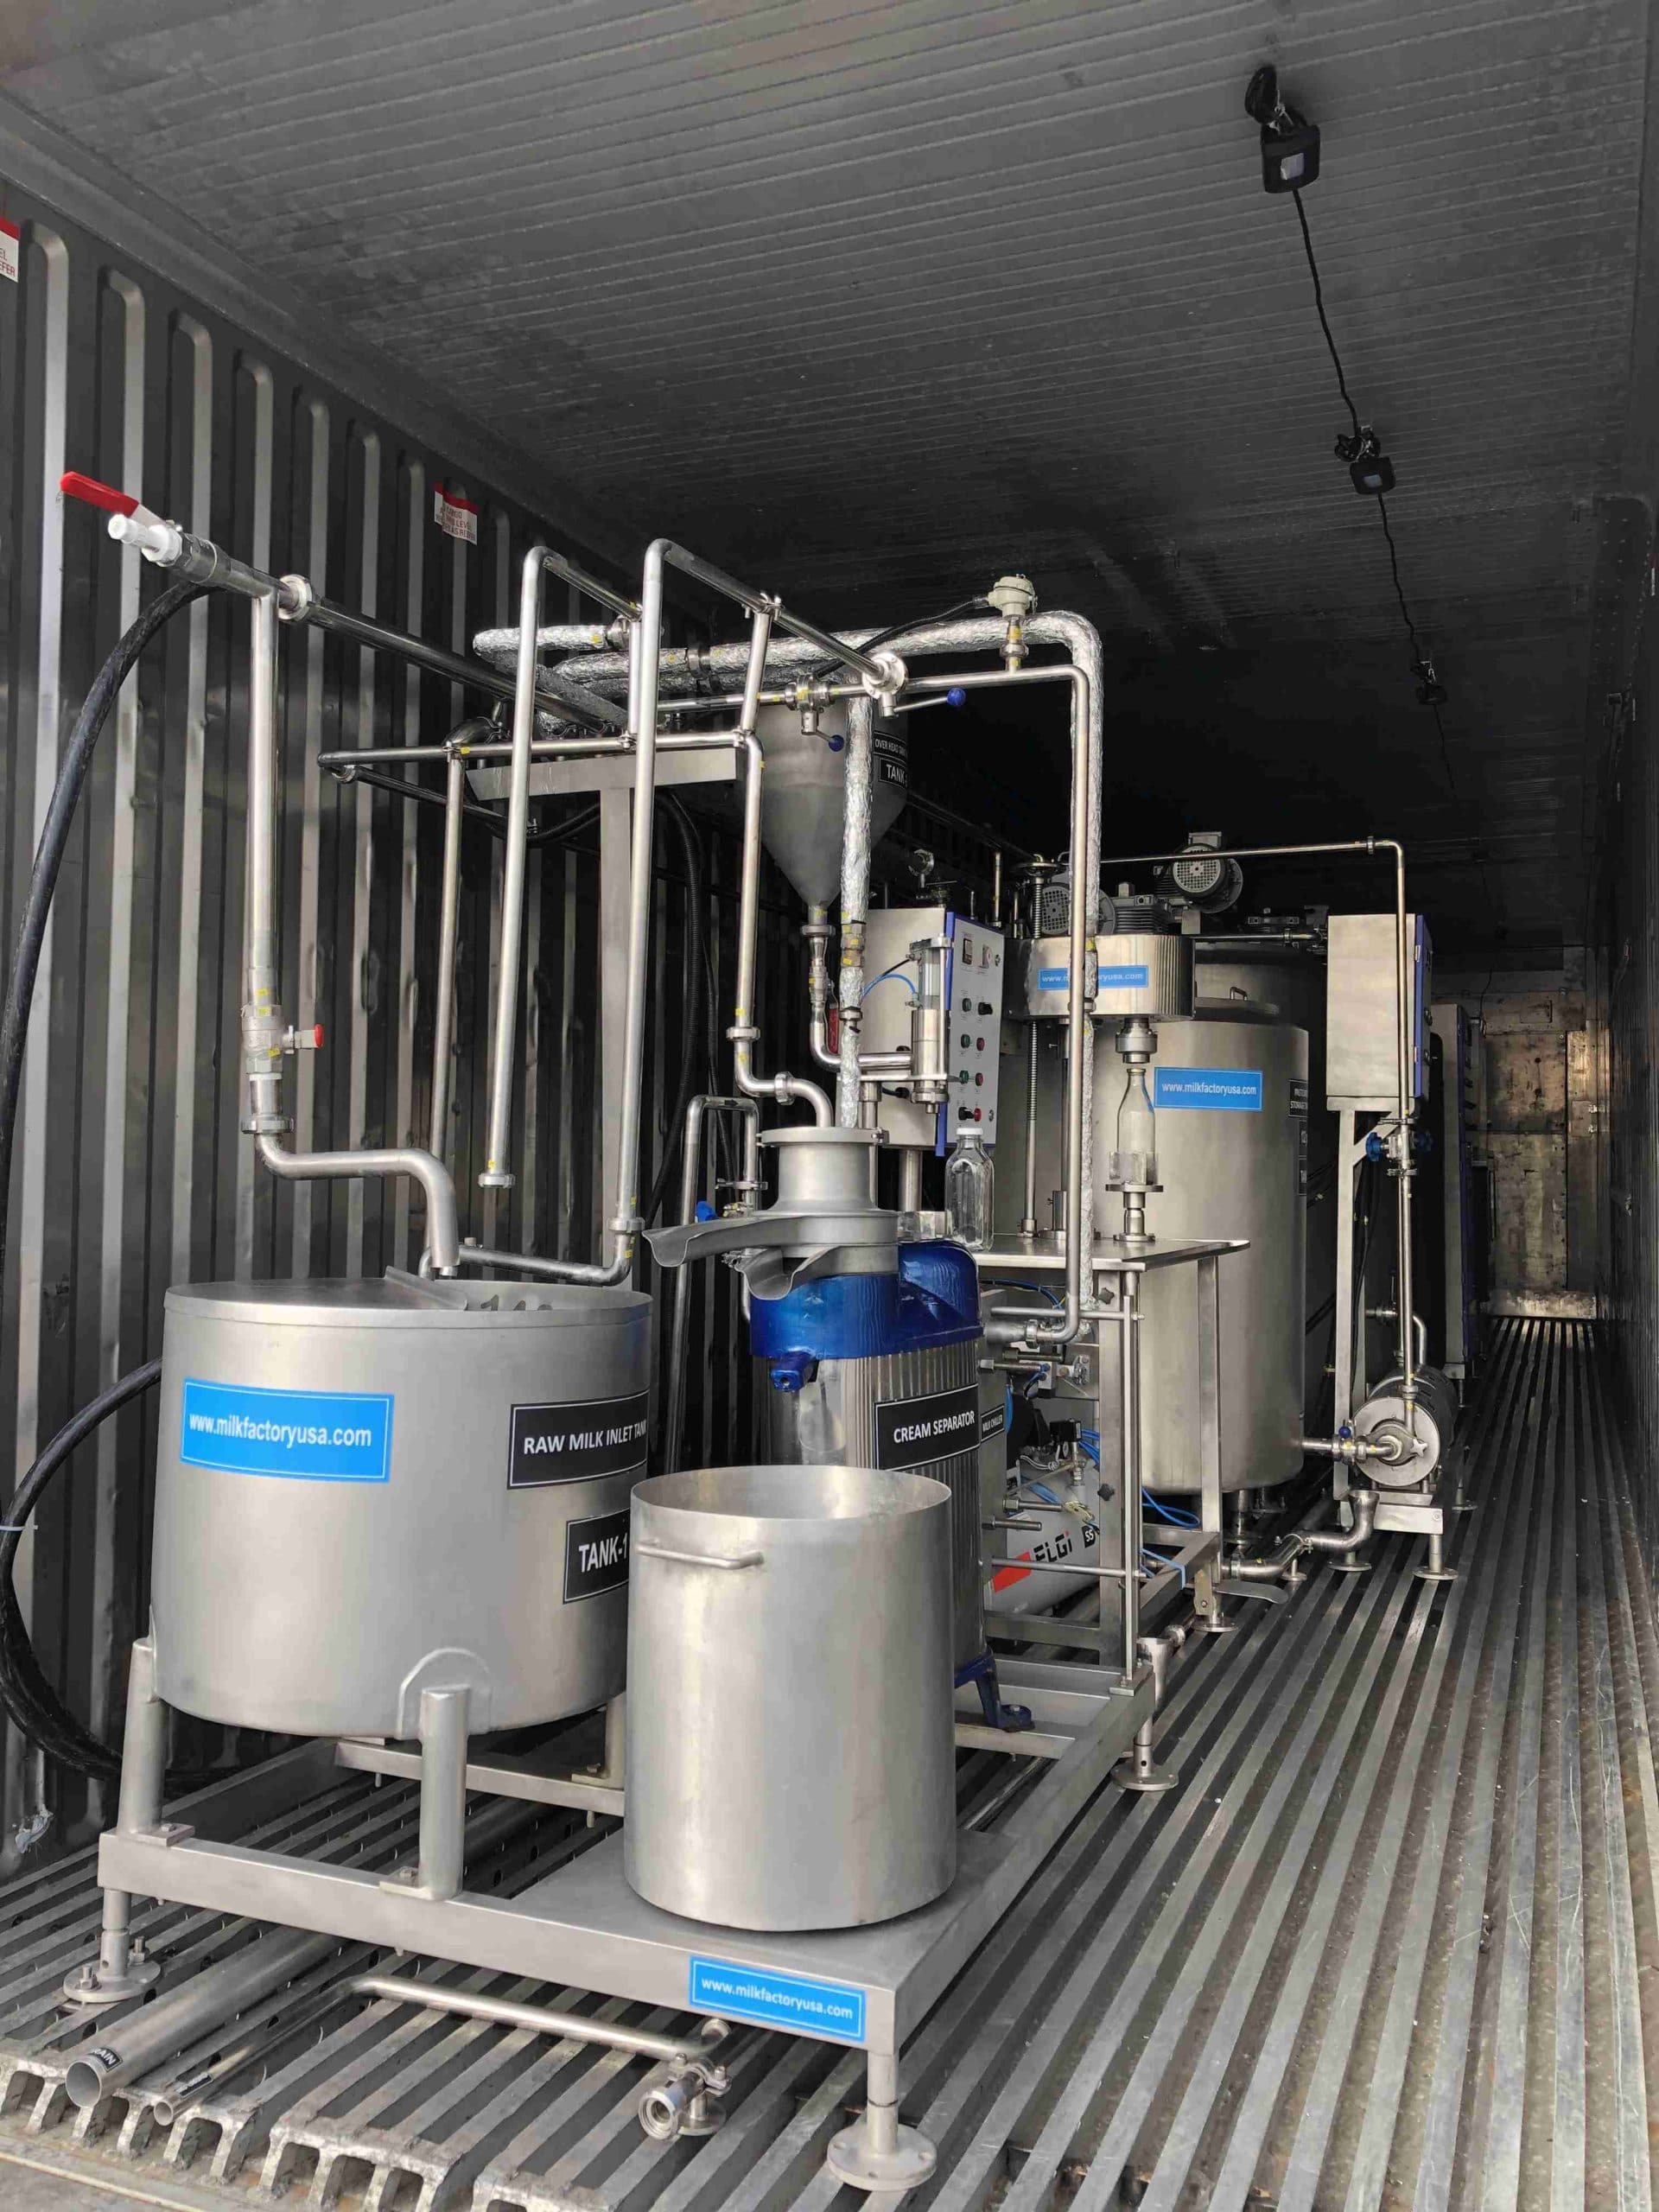 Milk Pasteurization Line Complet And Installed In A Container 59 900€